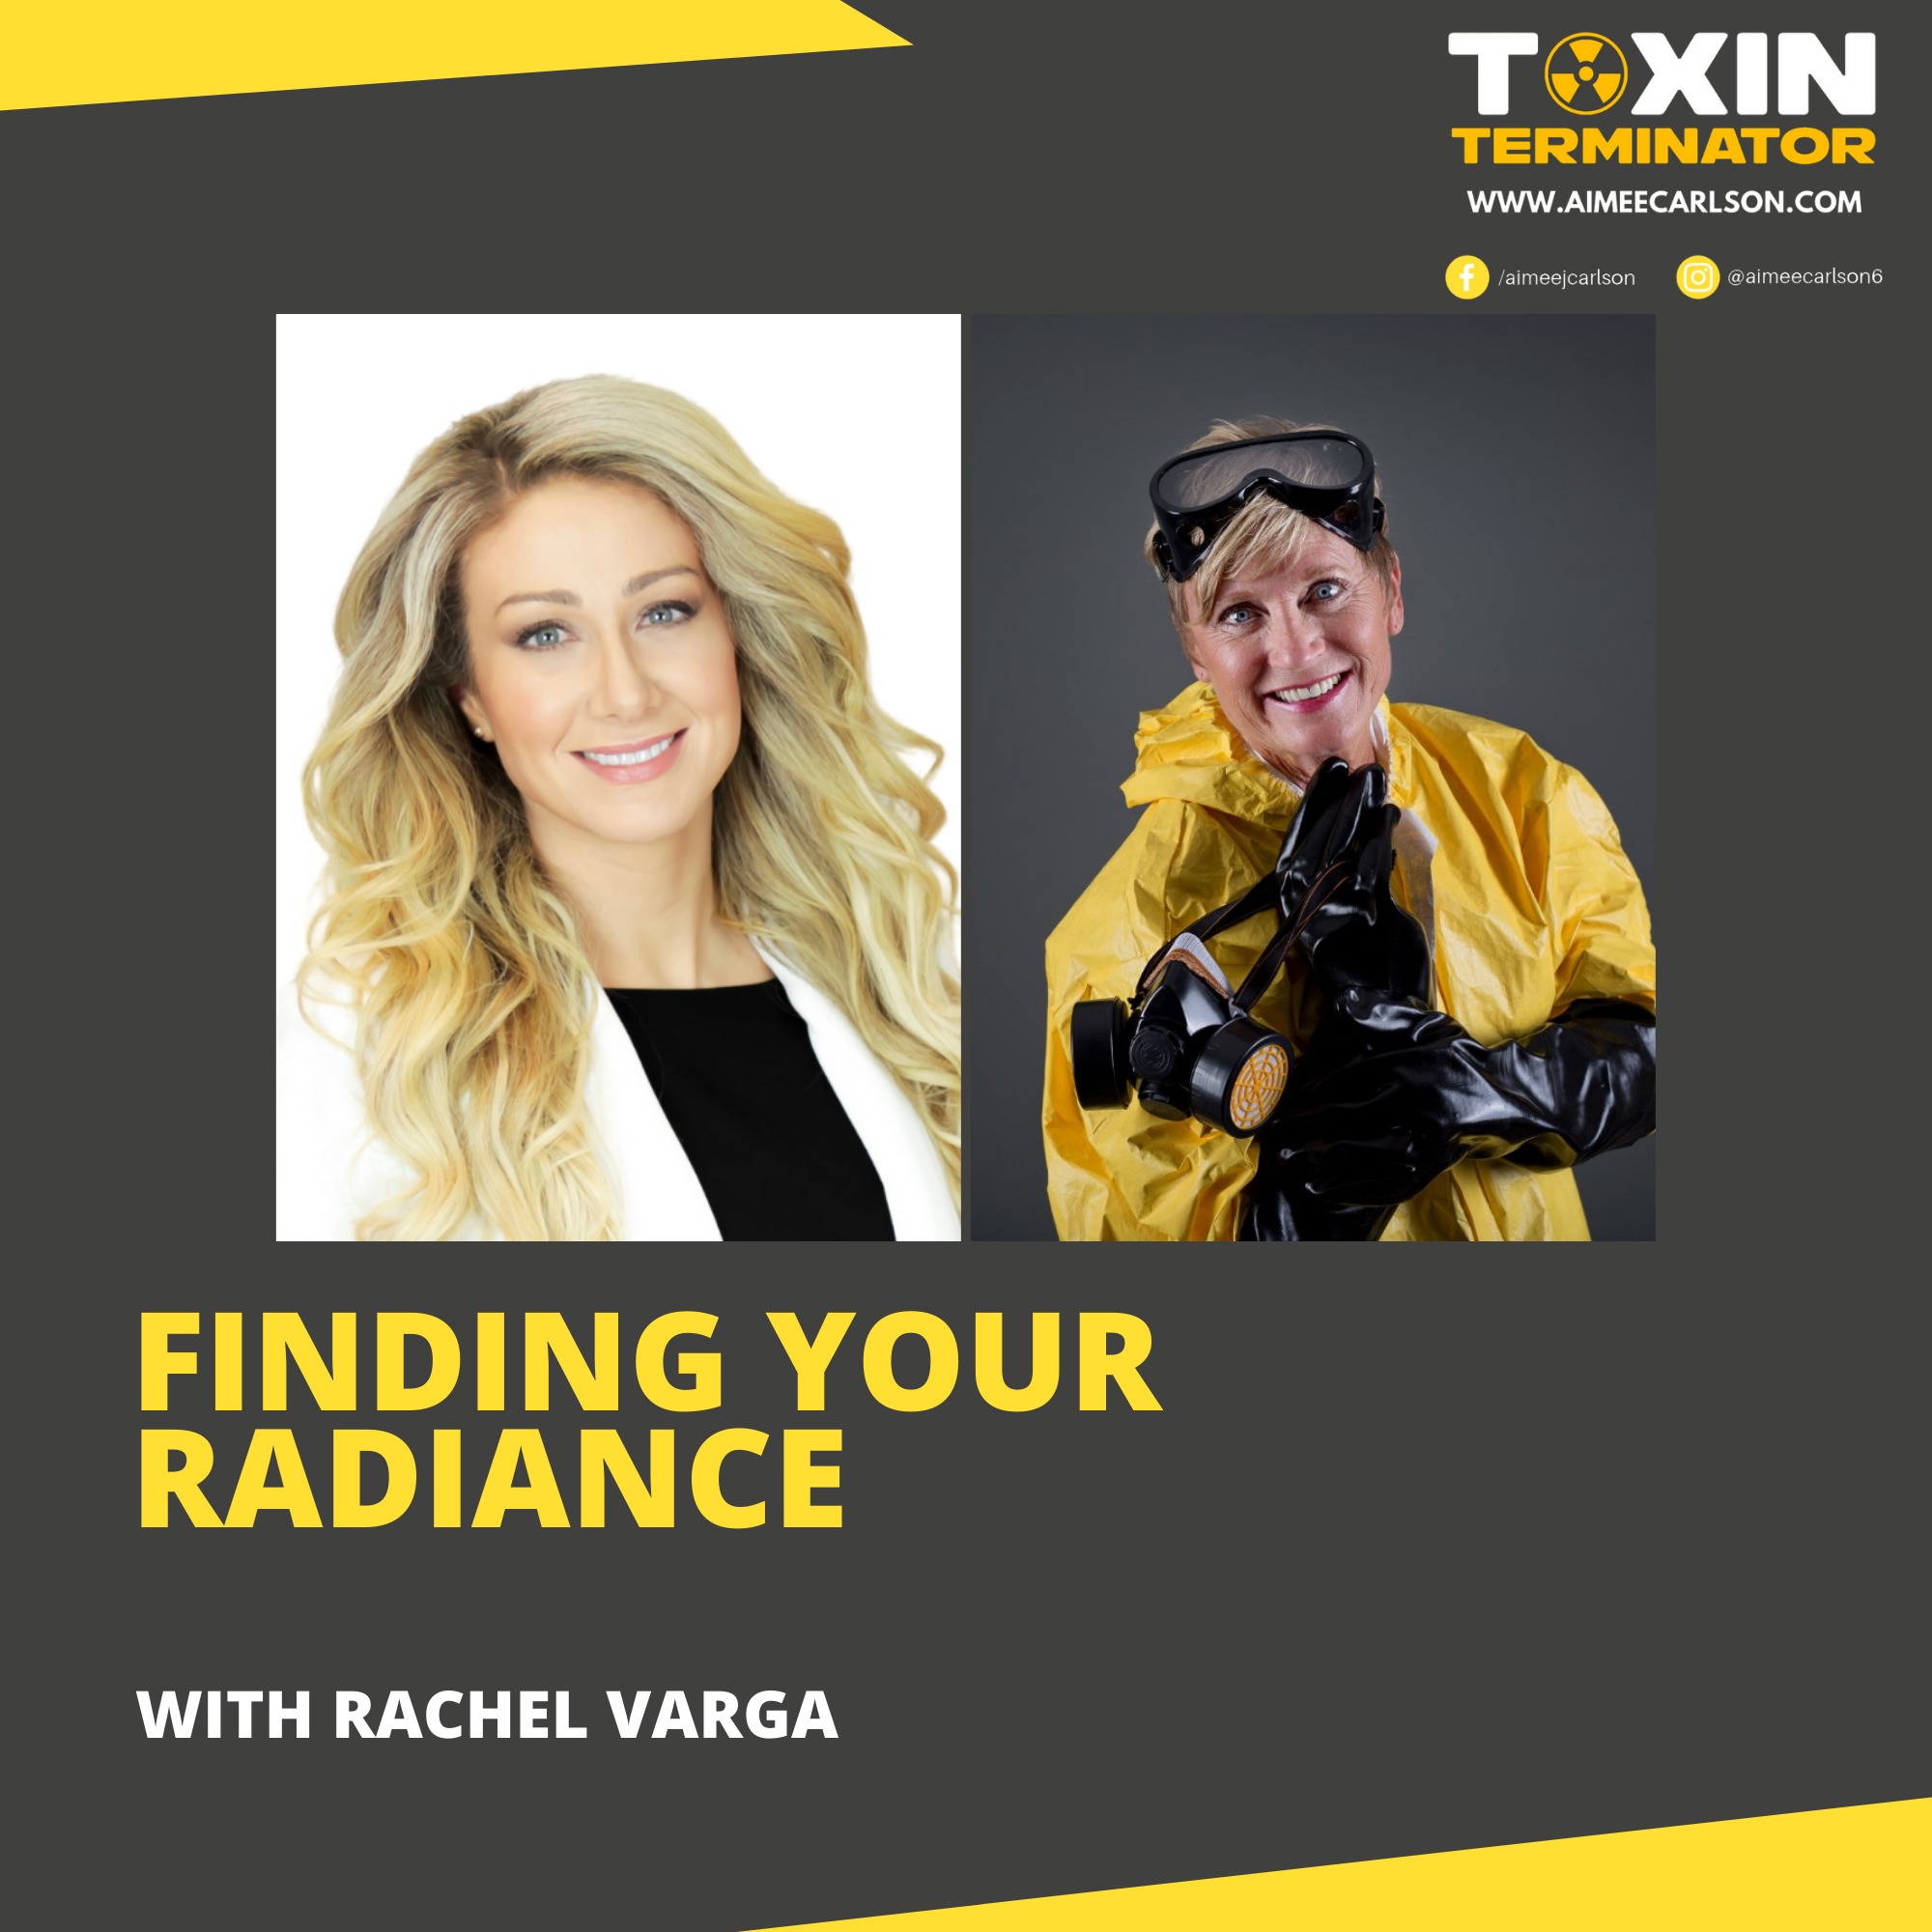 Finding Your Radiance with Rachel Varga